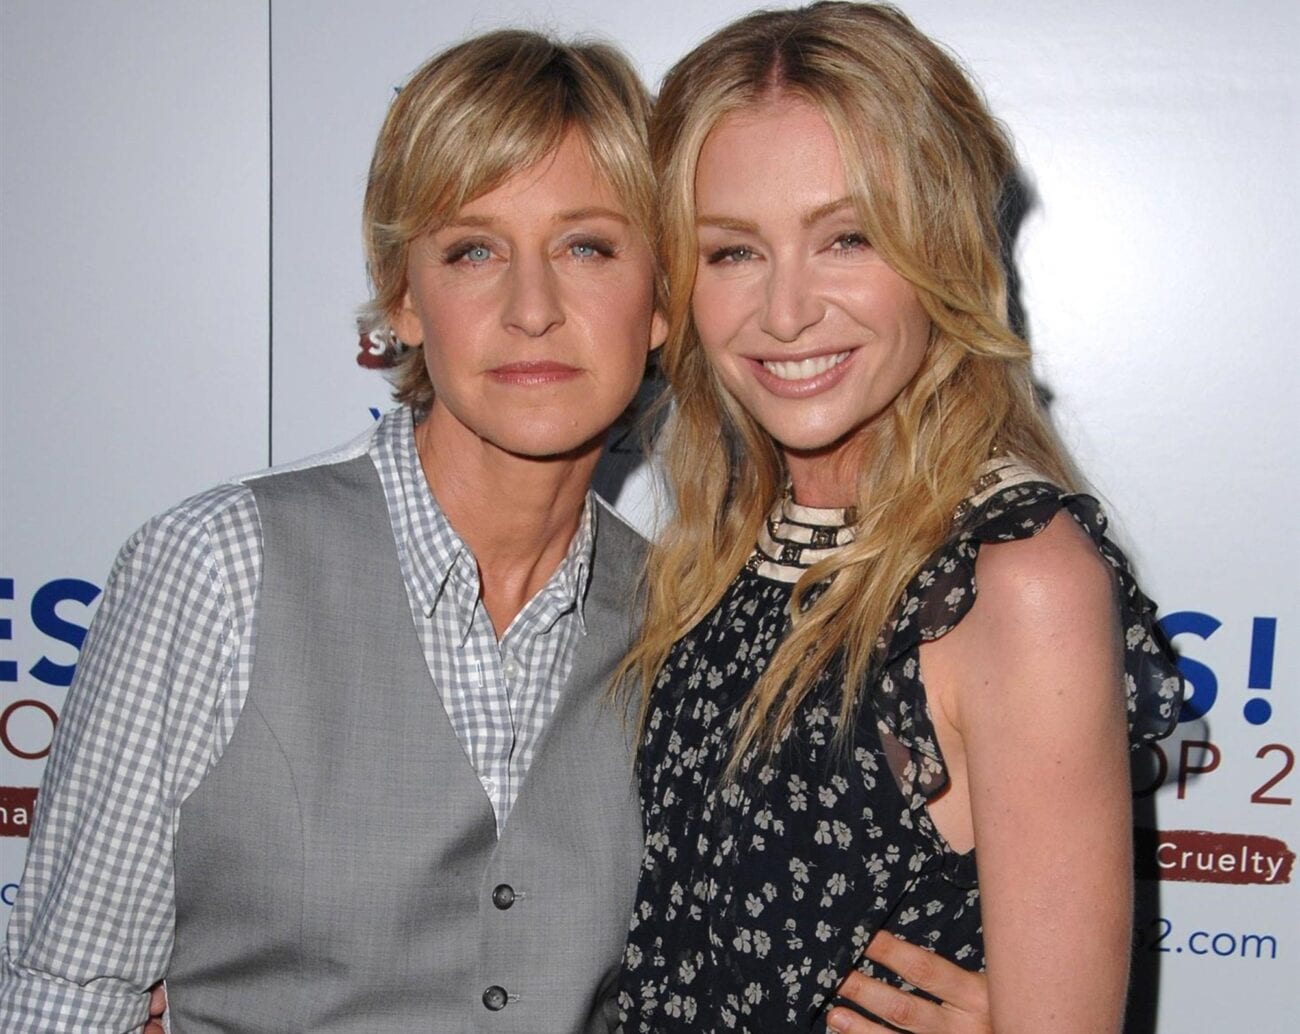 Ellen Degeneres and her wife Portia may be heading towards a breakup and the price tag for their divorce could be a hefty $500 million.